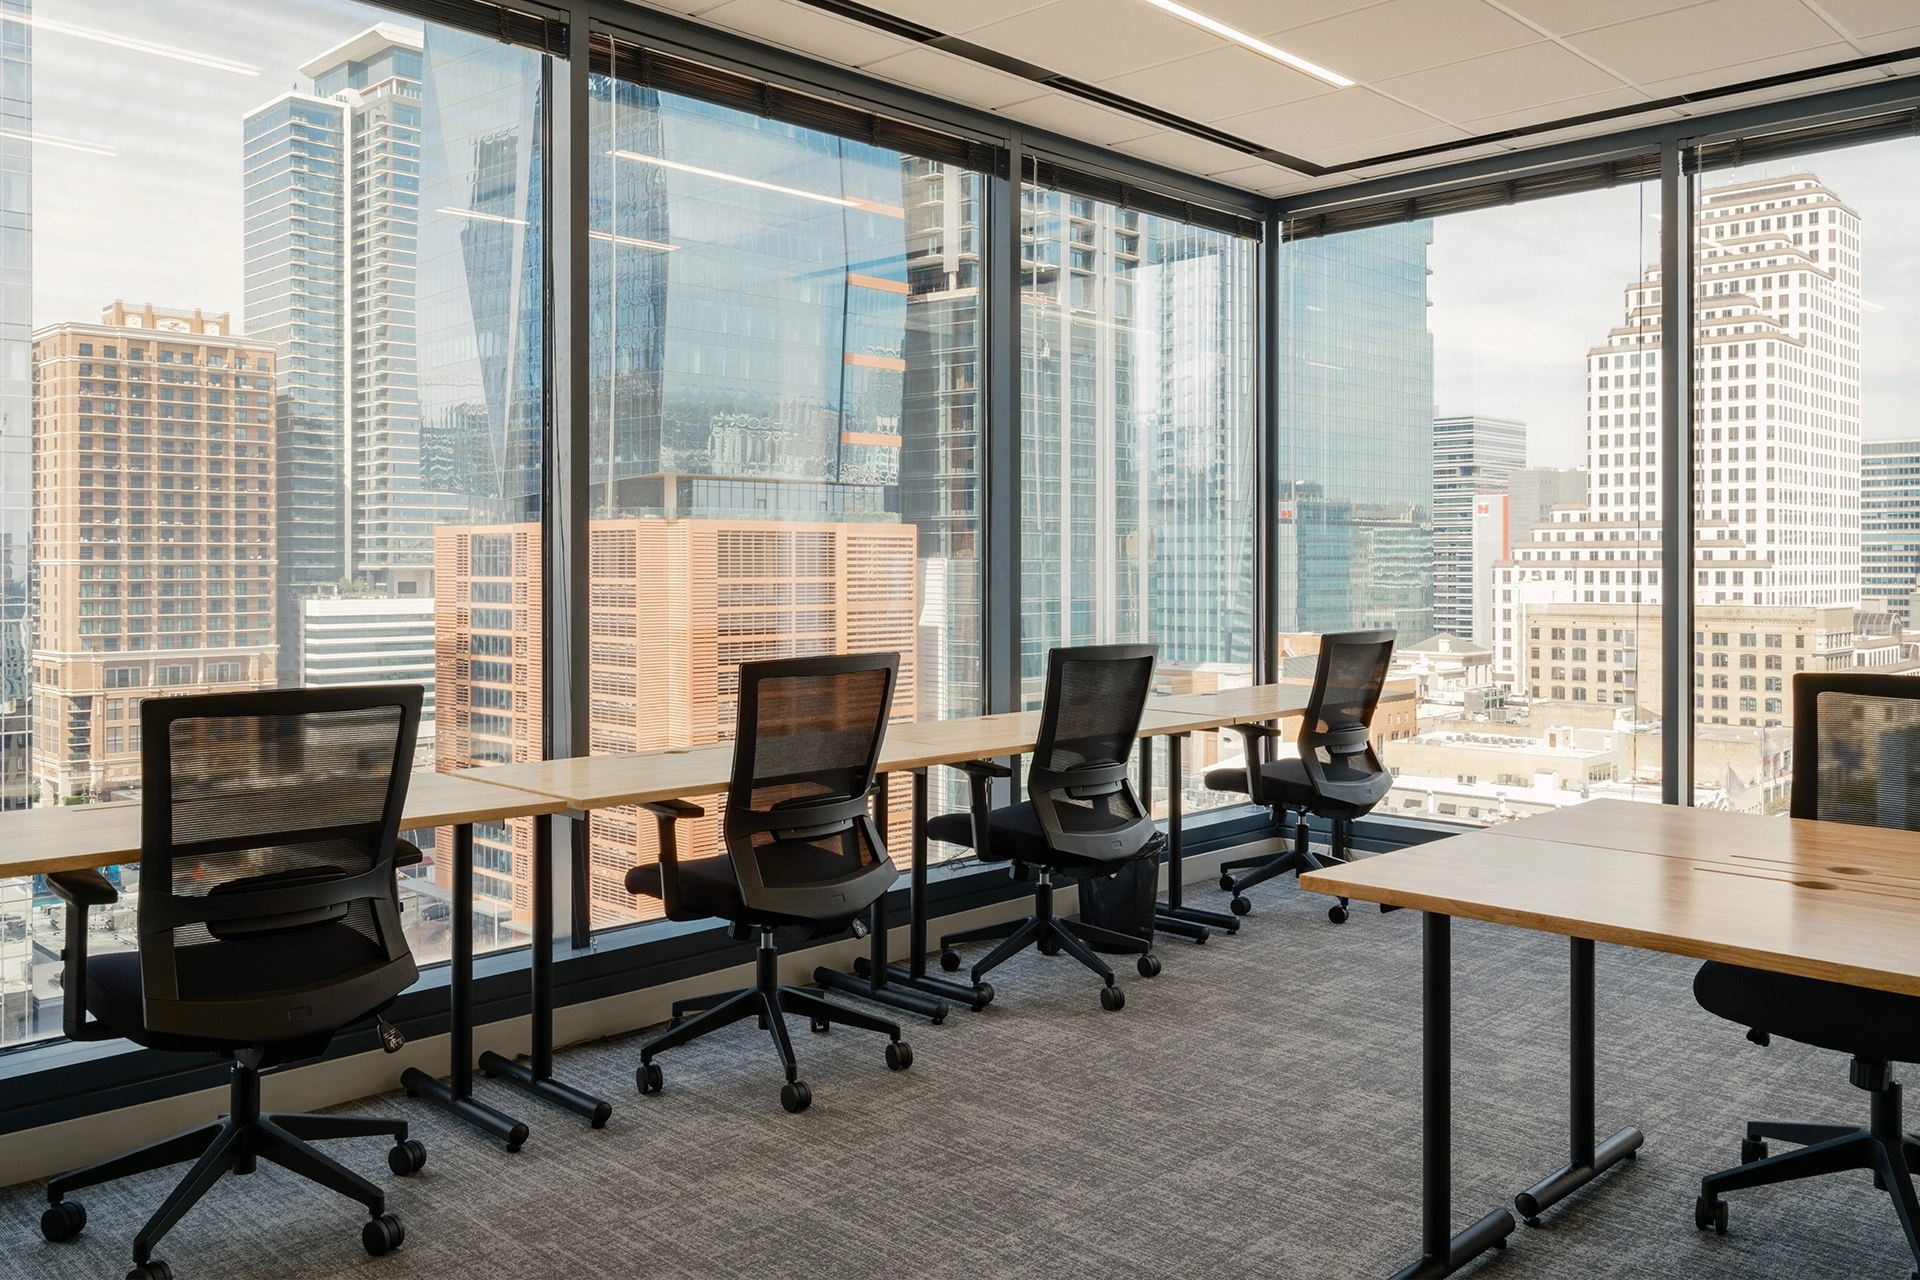 Modern coworking space with large windows overlooking the Austin city skyline.